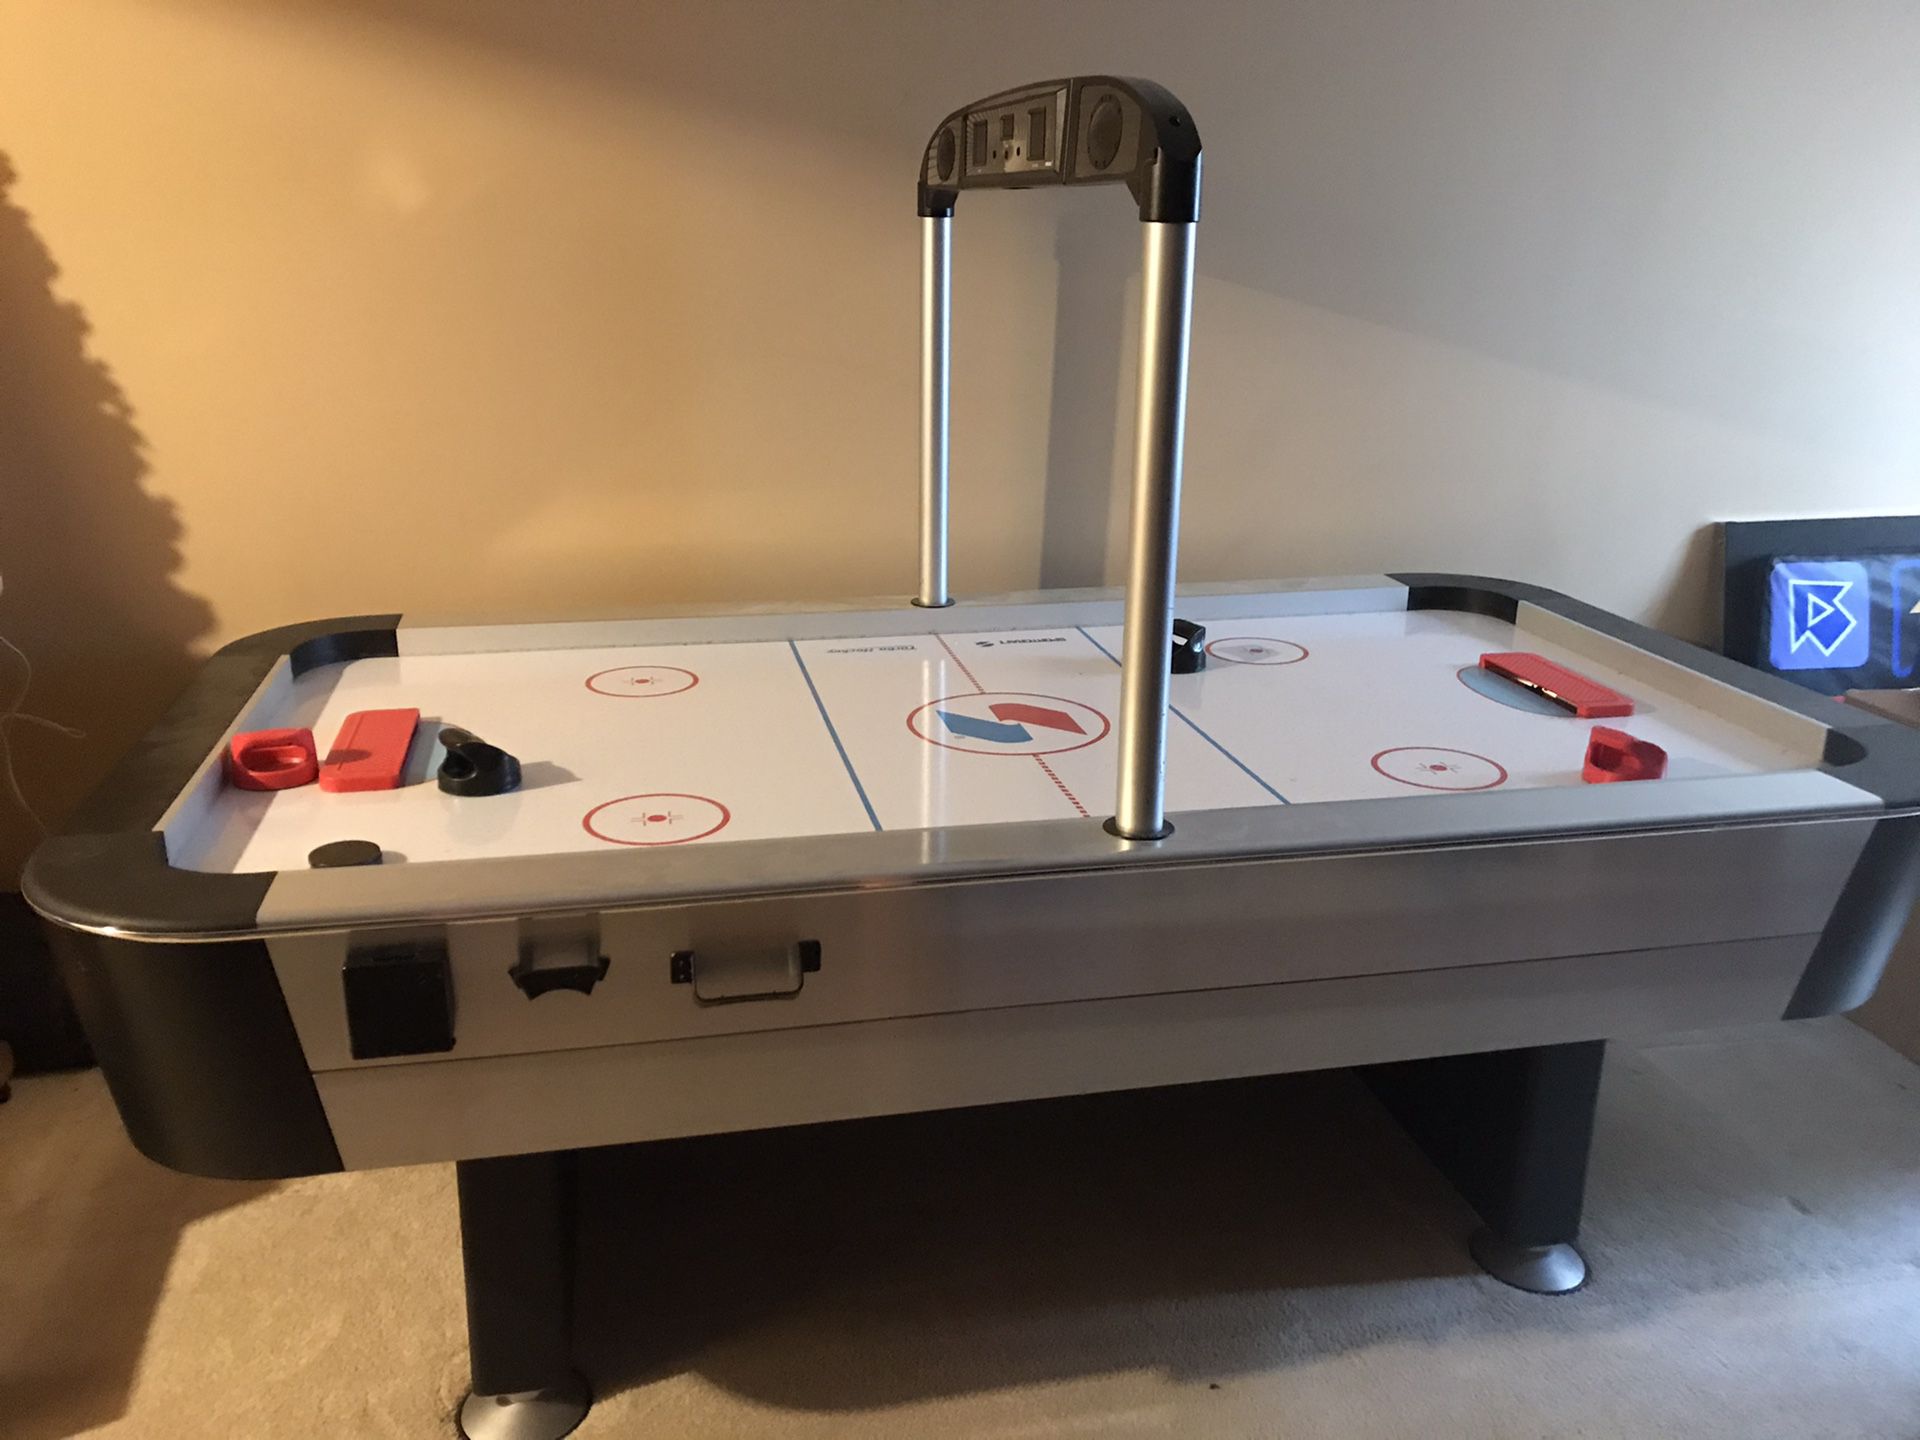 Air Hockey Table by Sports Craft